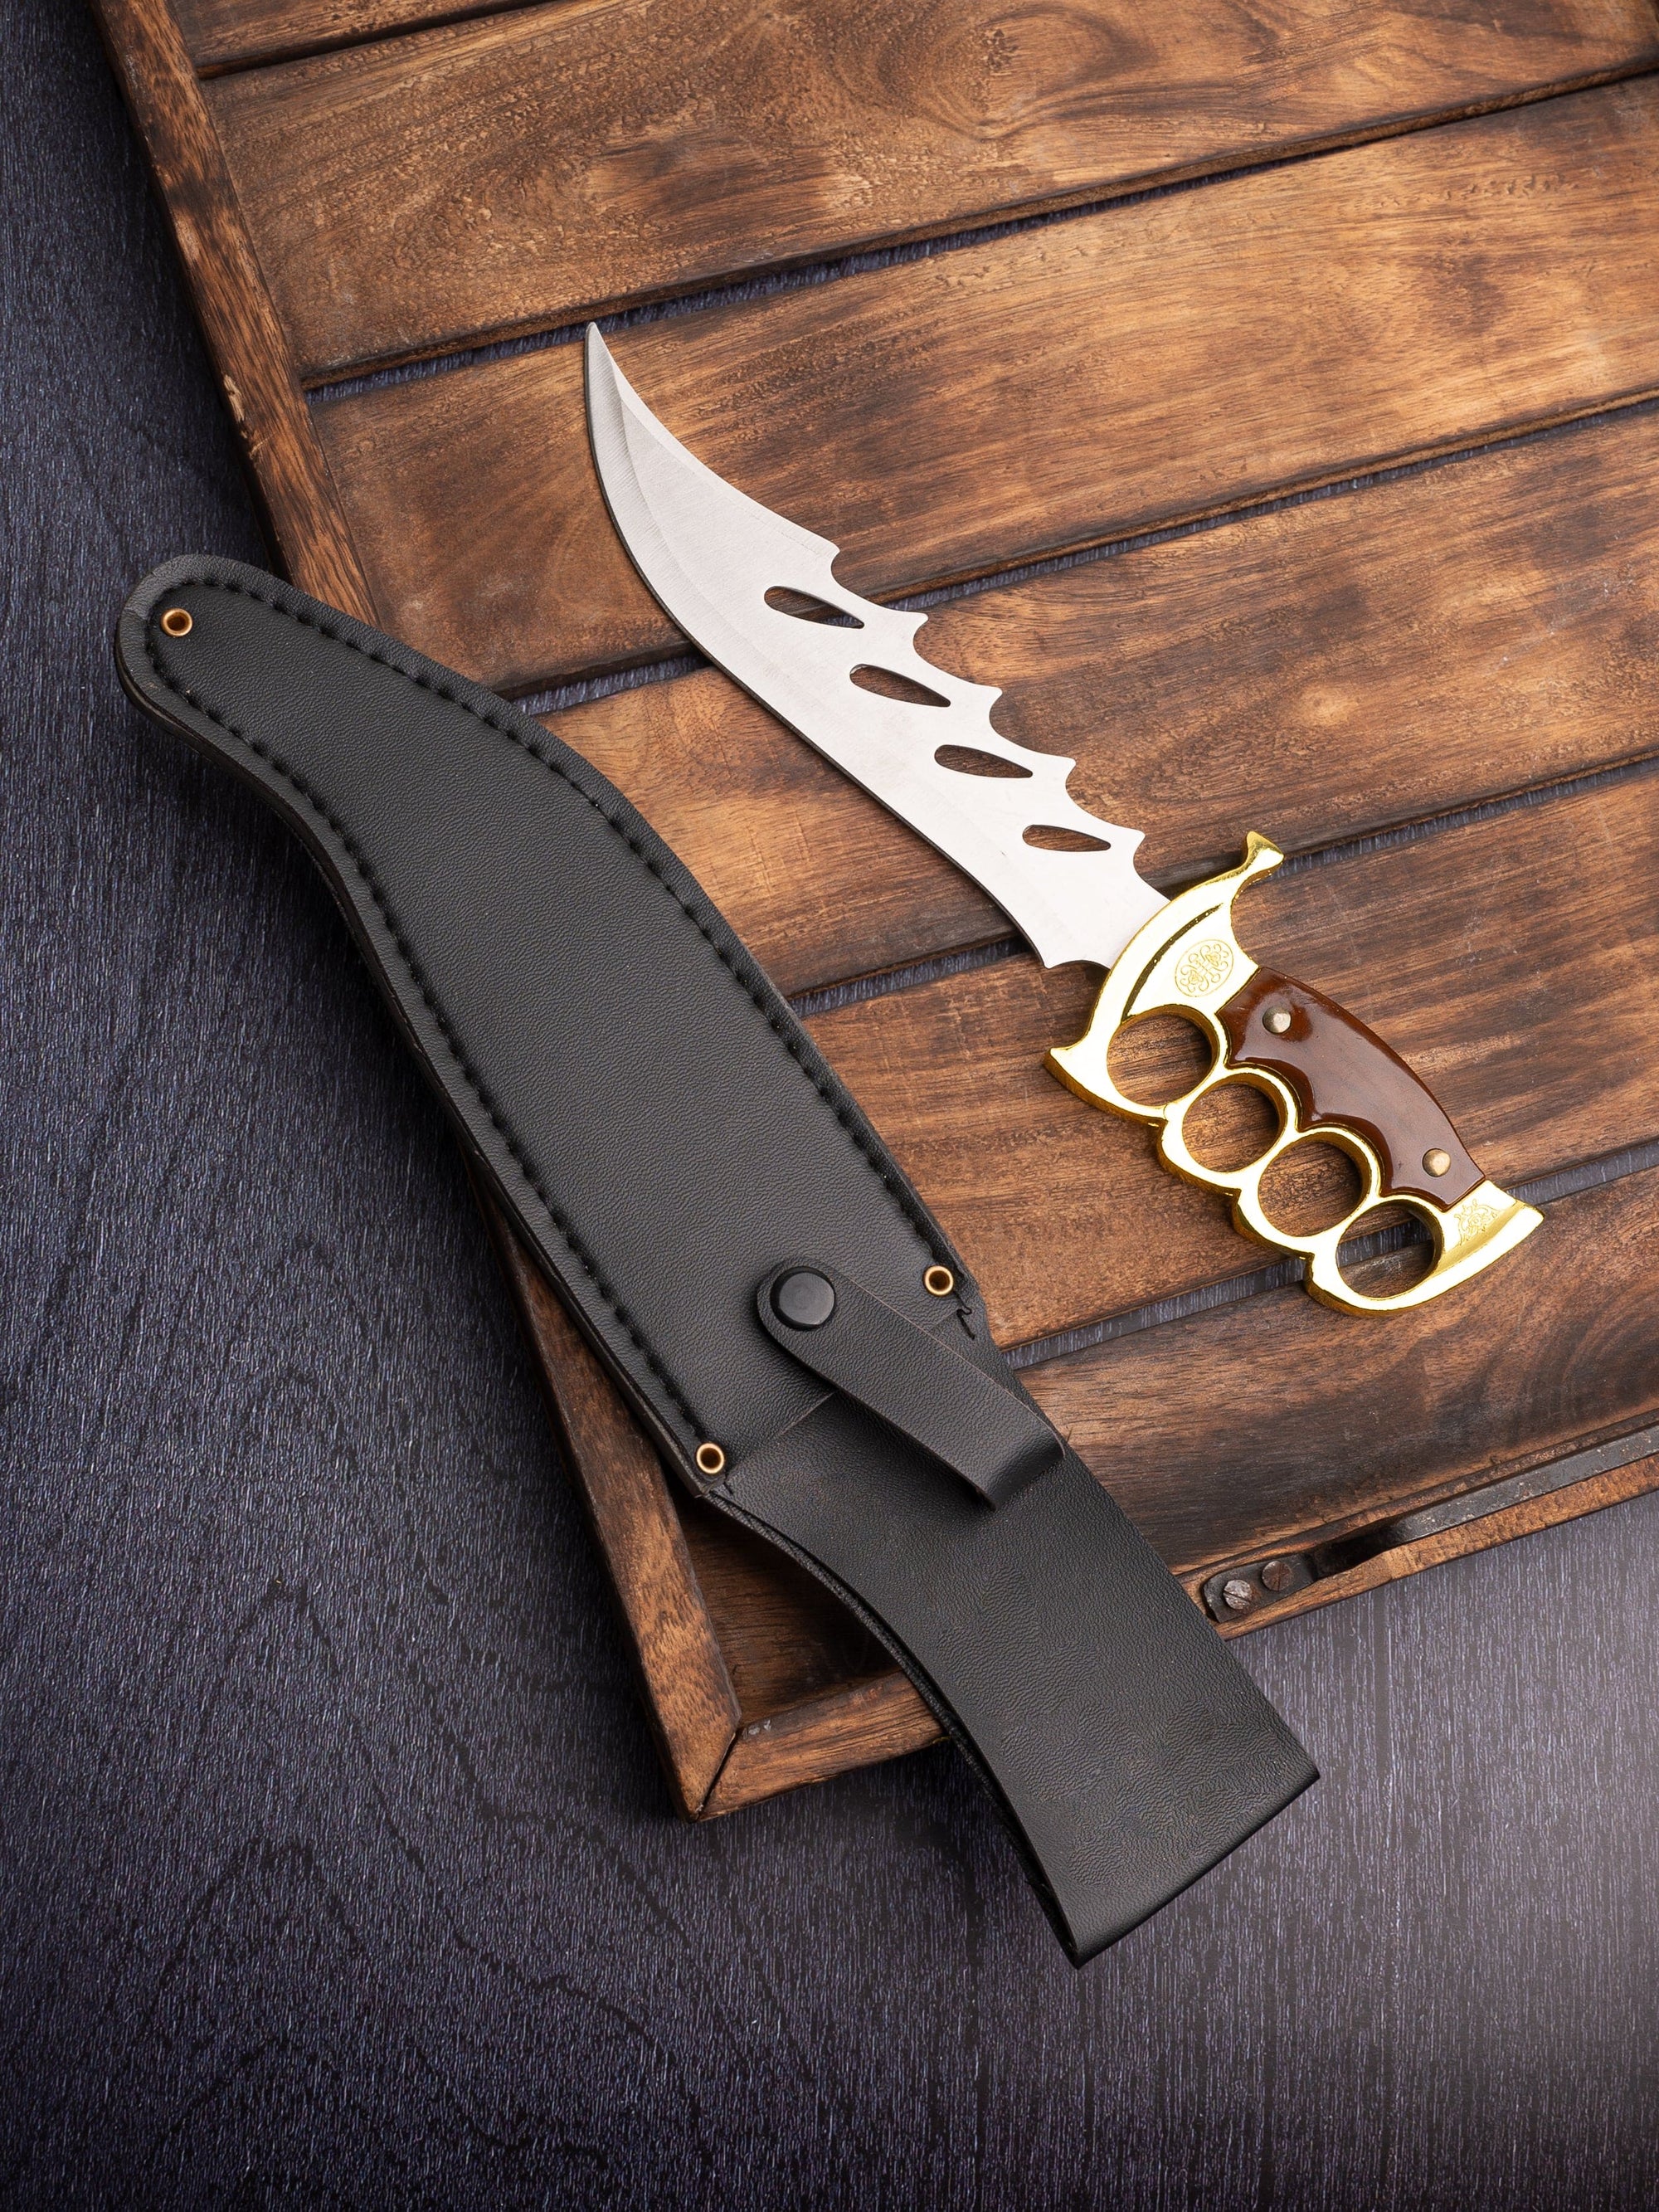 12" Hunting Knife / Dagger in a Black Leather Case with Golden Grip Handle for Home Decor